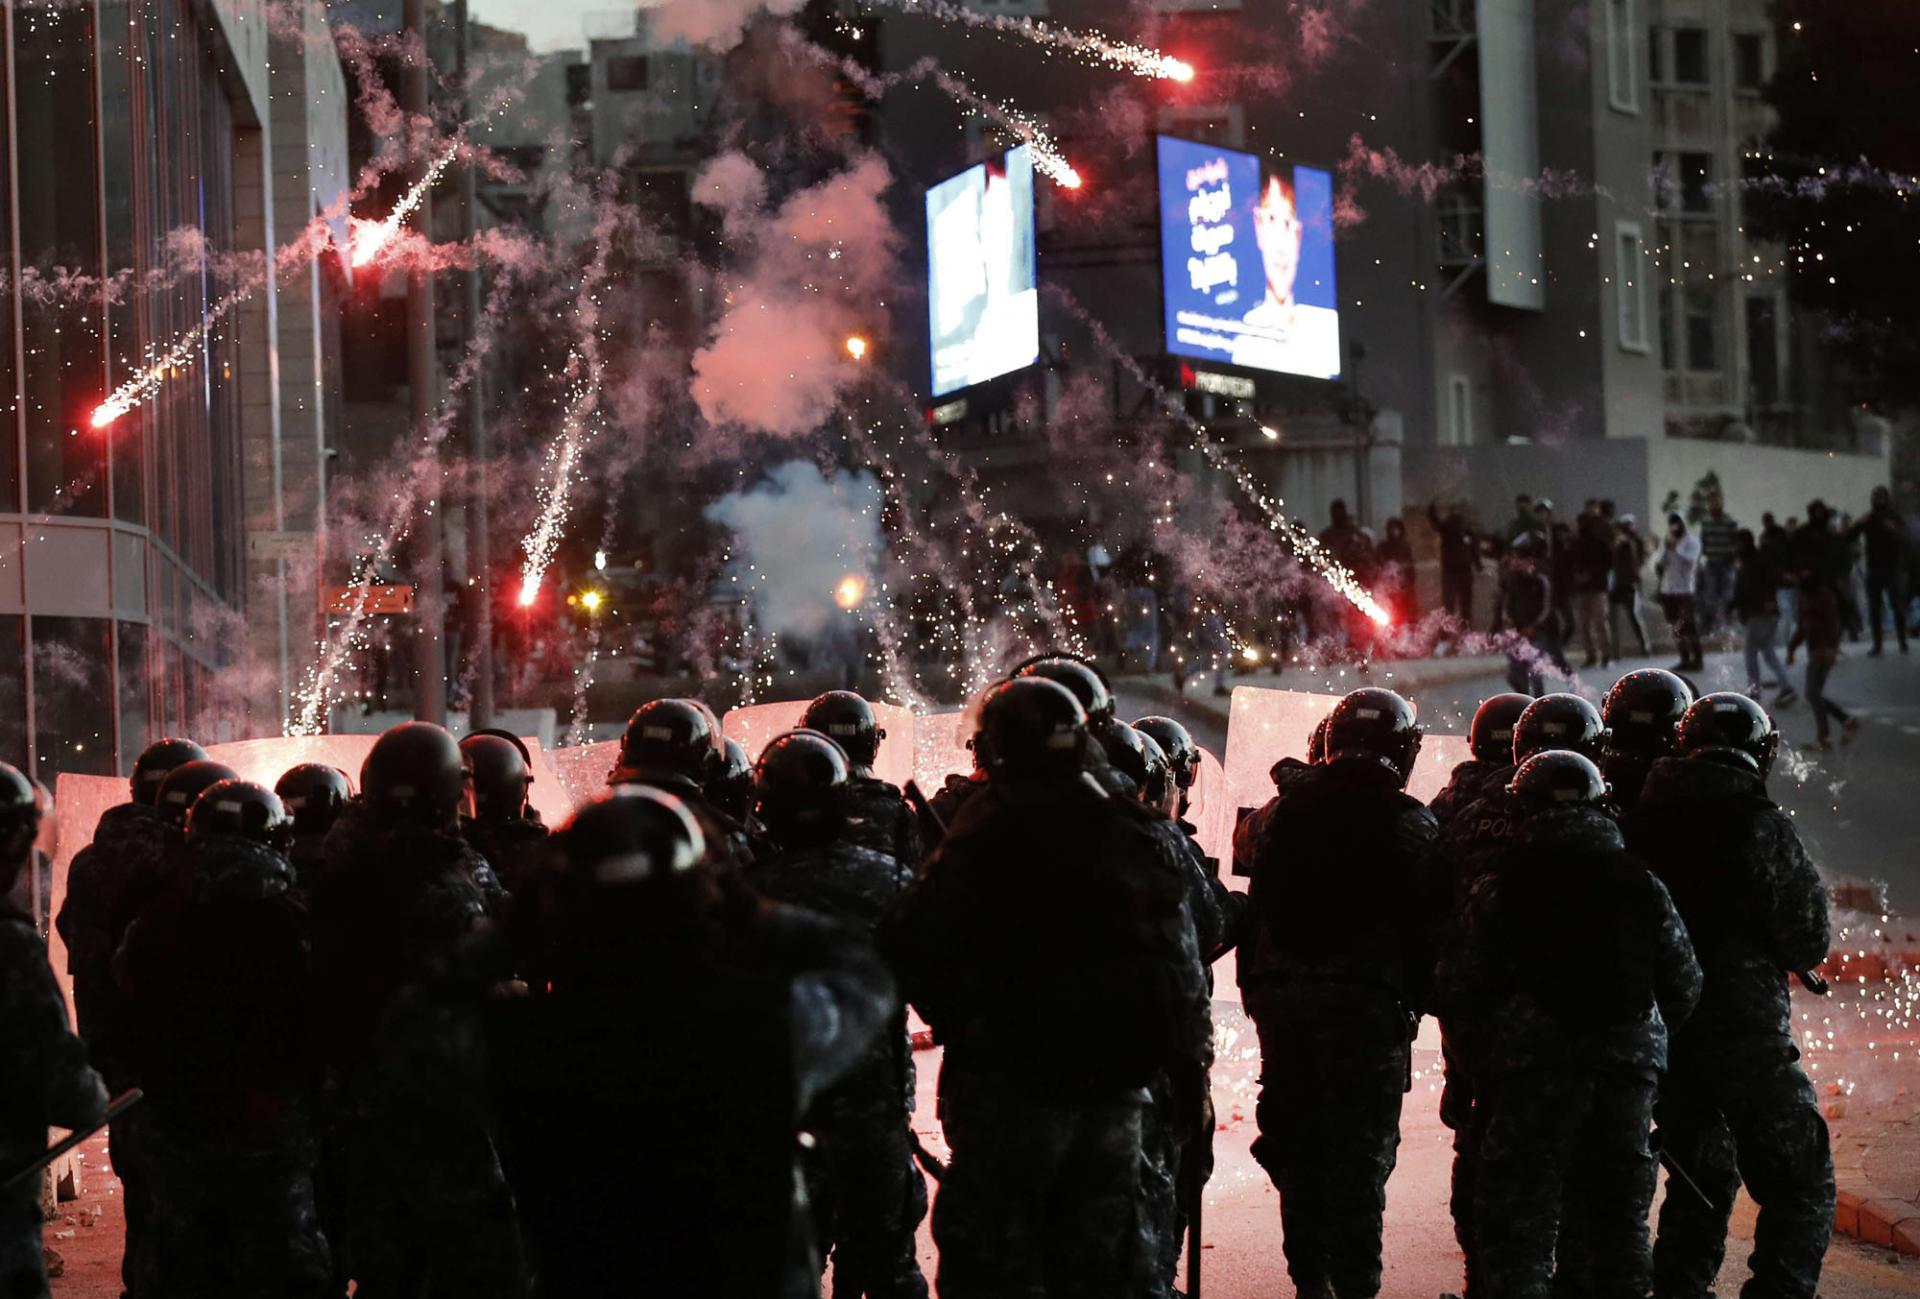 Anti-riot police intervened, firing teargas to disperse them.